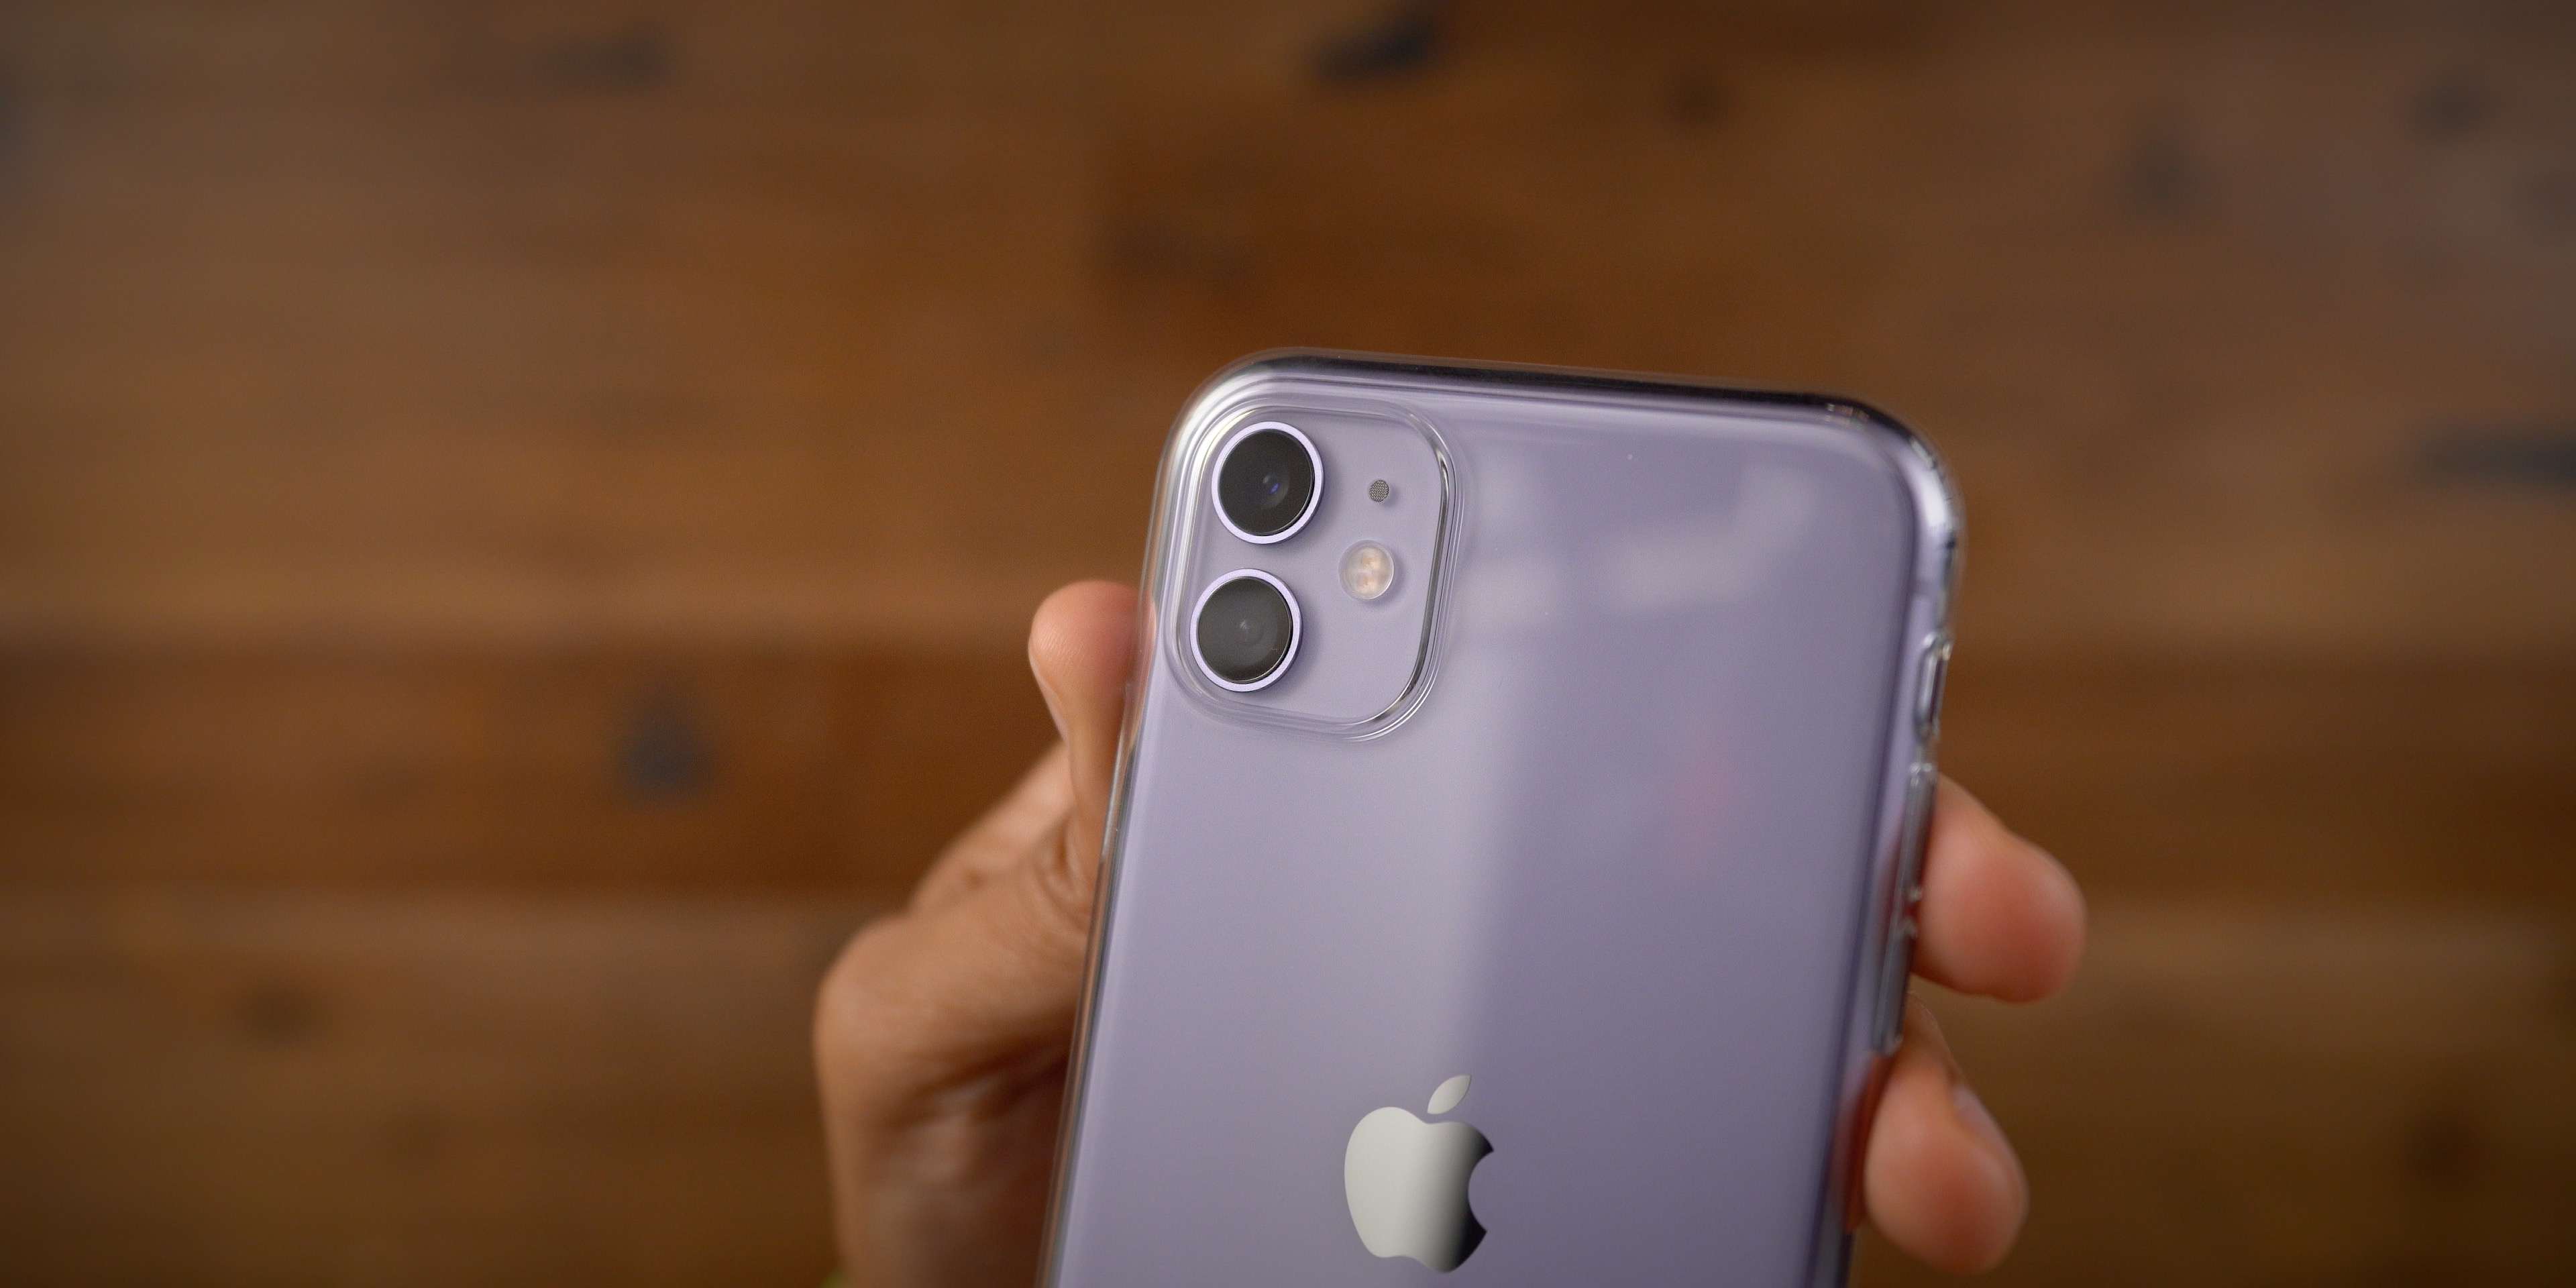 iPhone 11 Clear Case review: is it worth $40? [Video]